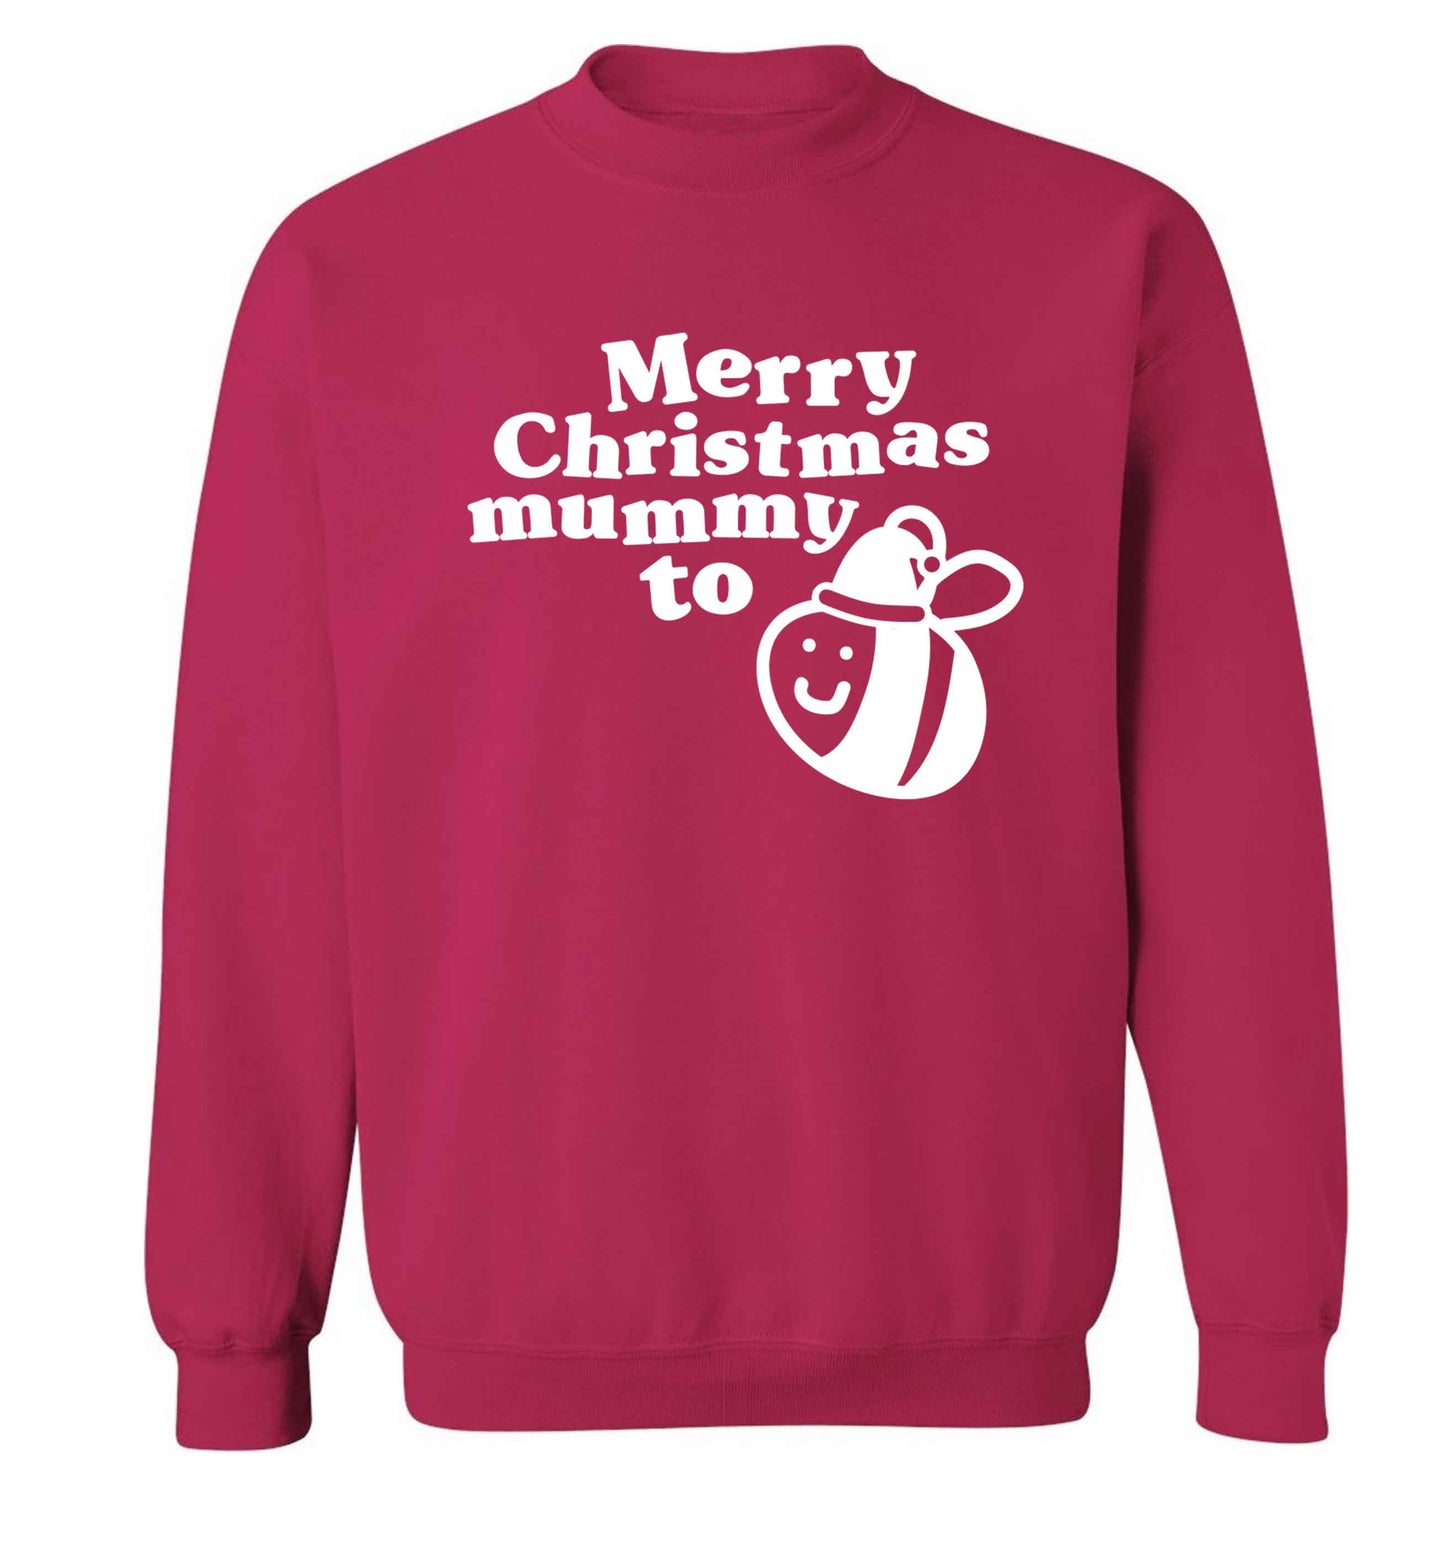 Merry Christmas mummy to be Adult's unisex pink Sweater 2XL